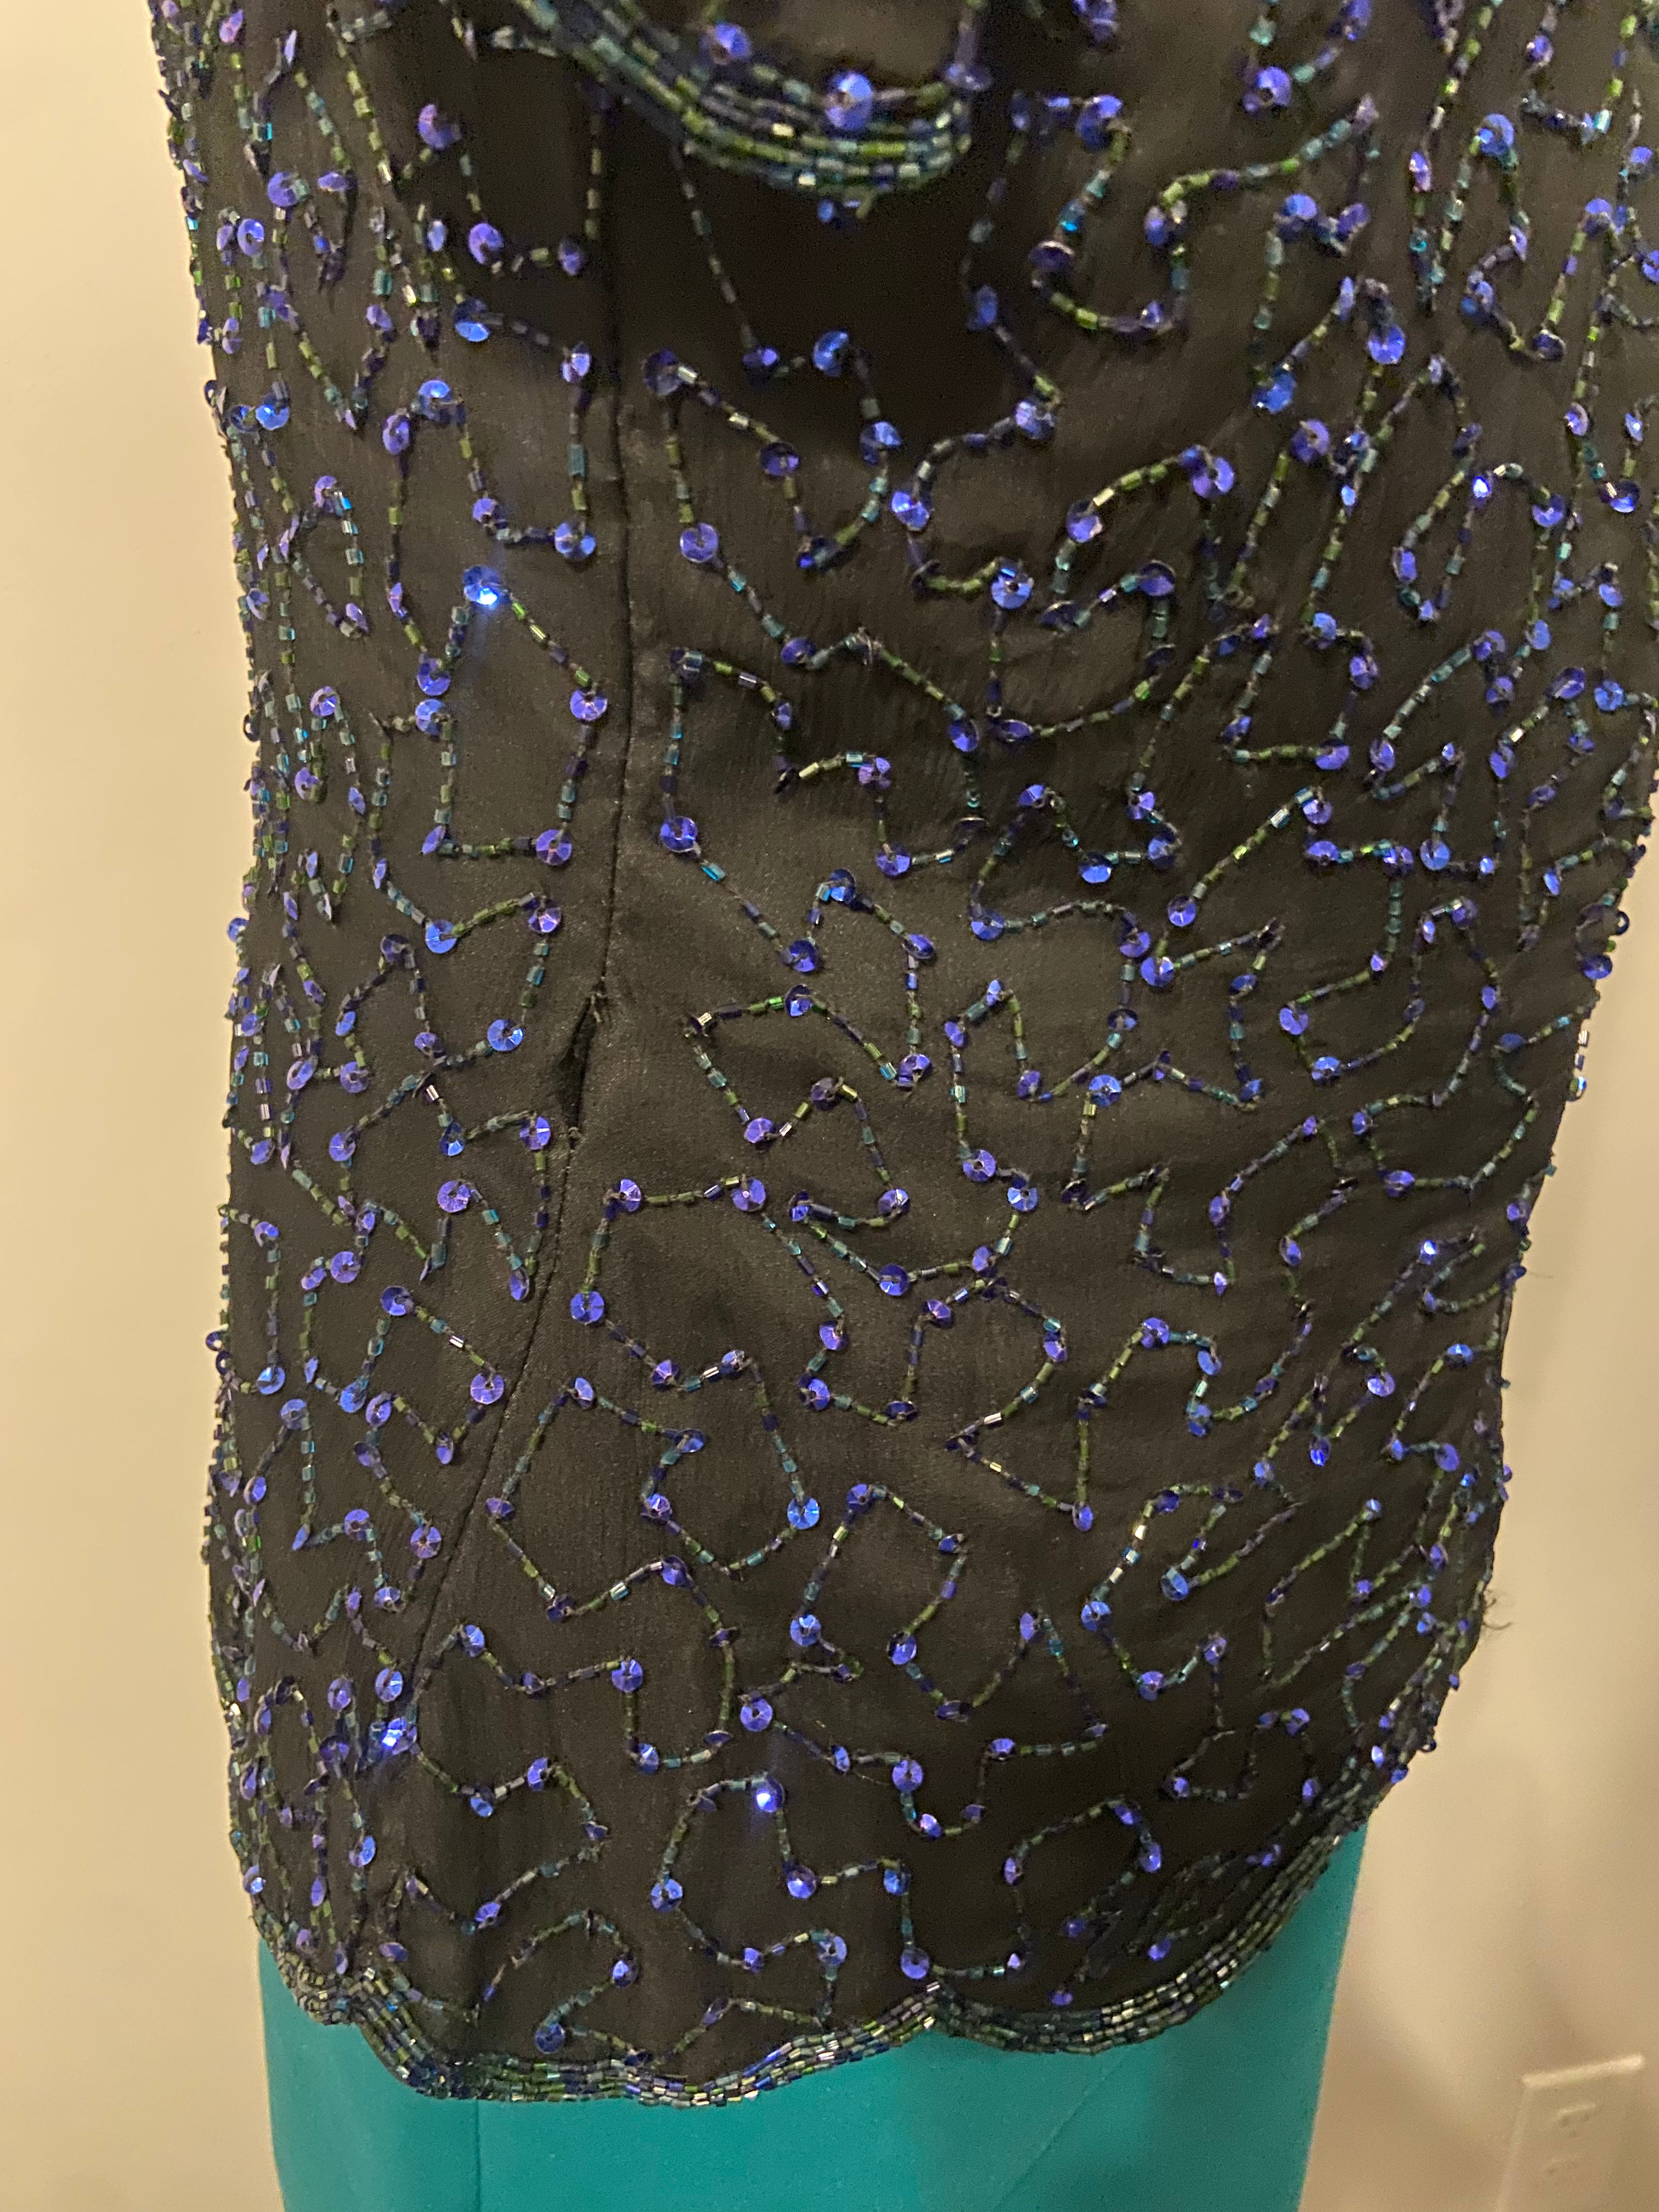 Papell Boutique Evening sequin/beaded top